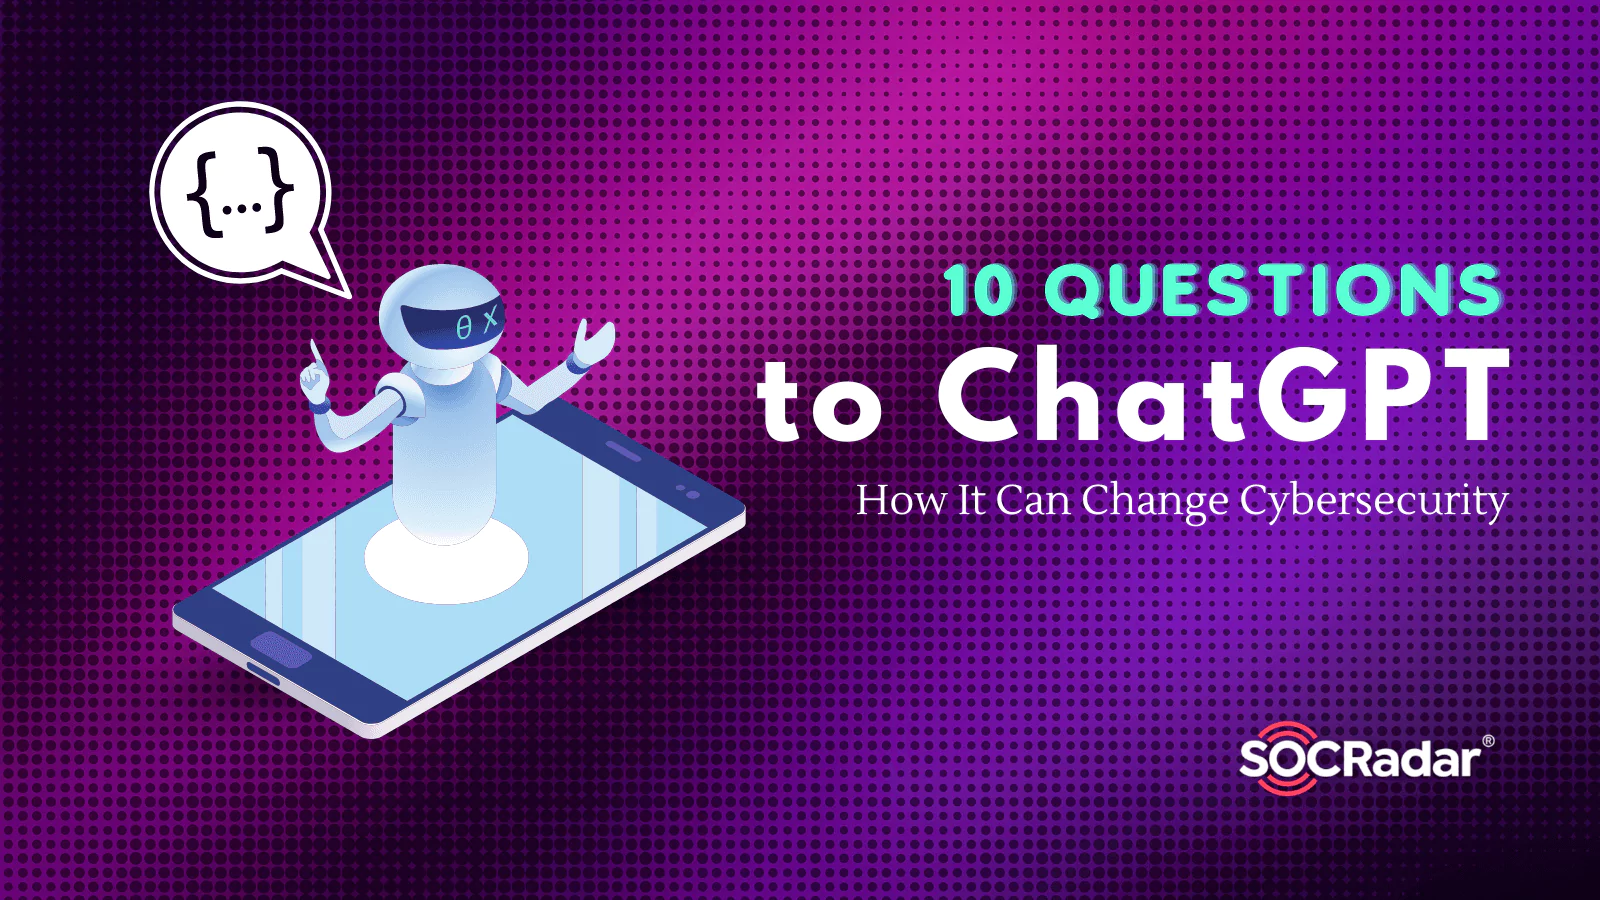 SOCRadar® Cyber Intelligence Inc. | 10 Questions to ChatGPT: How It Can Change Cybersecurity